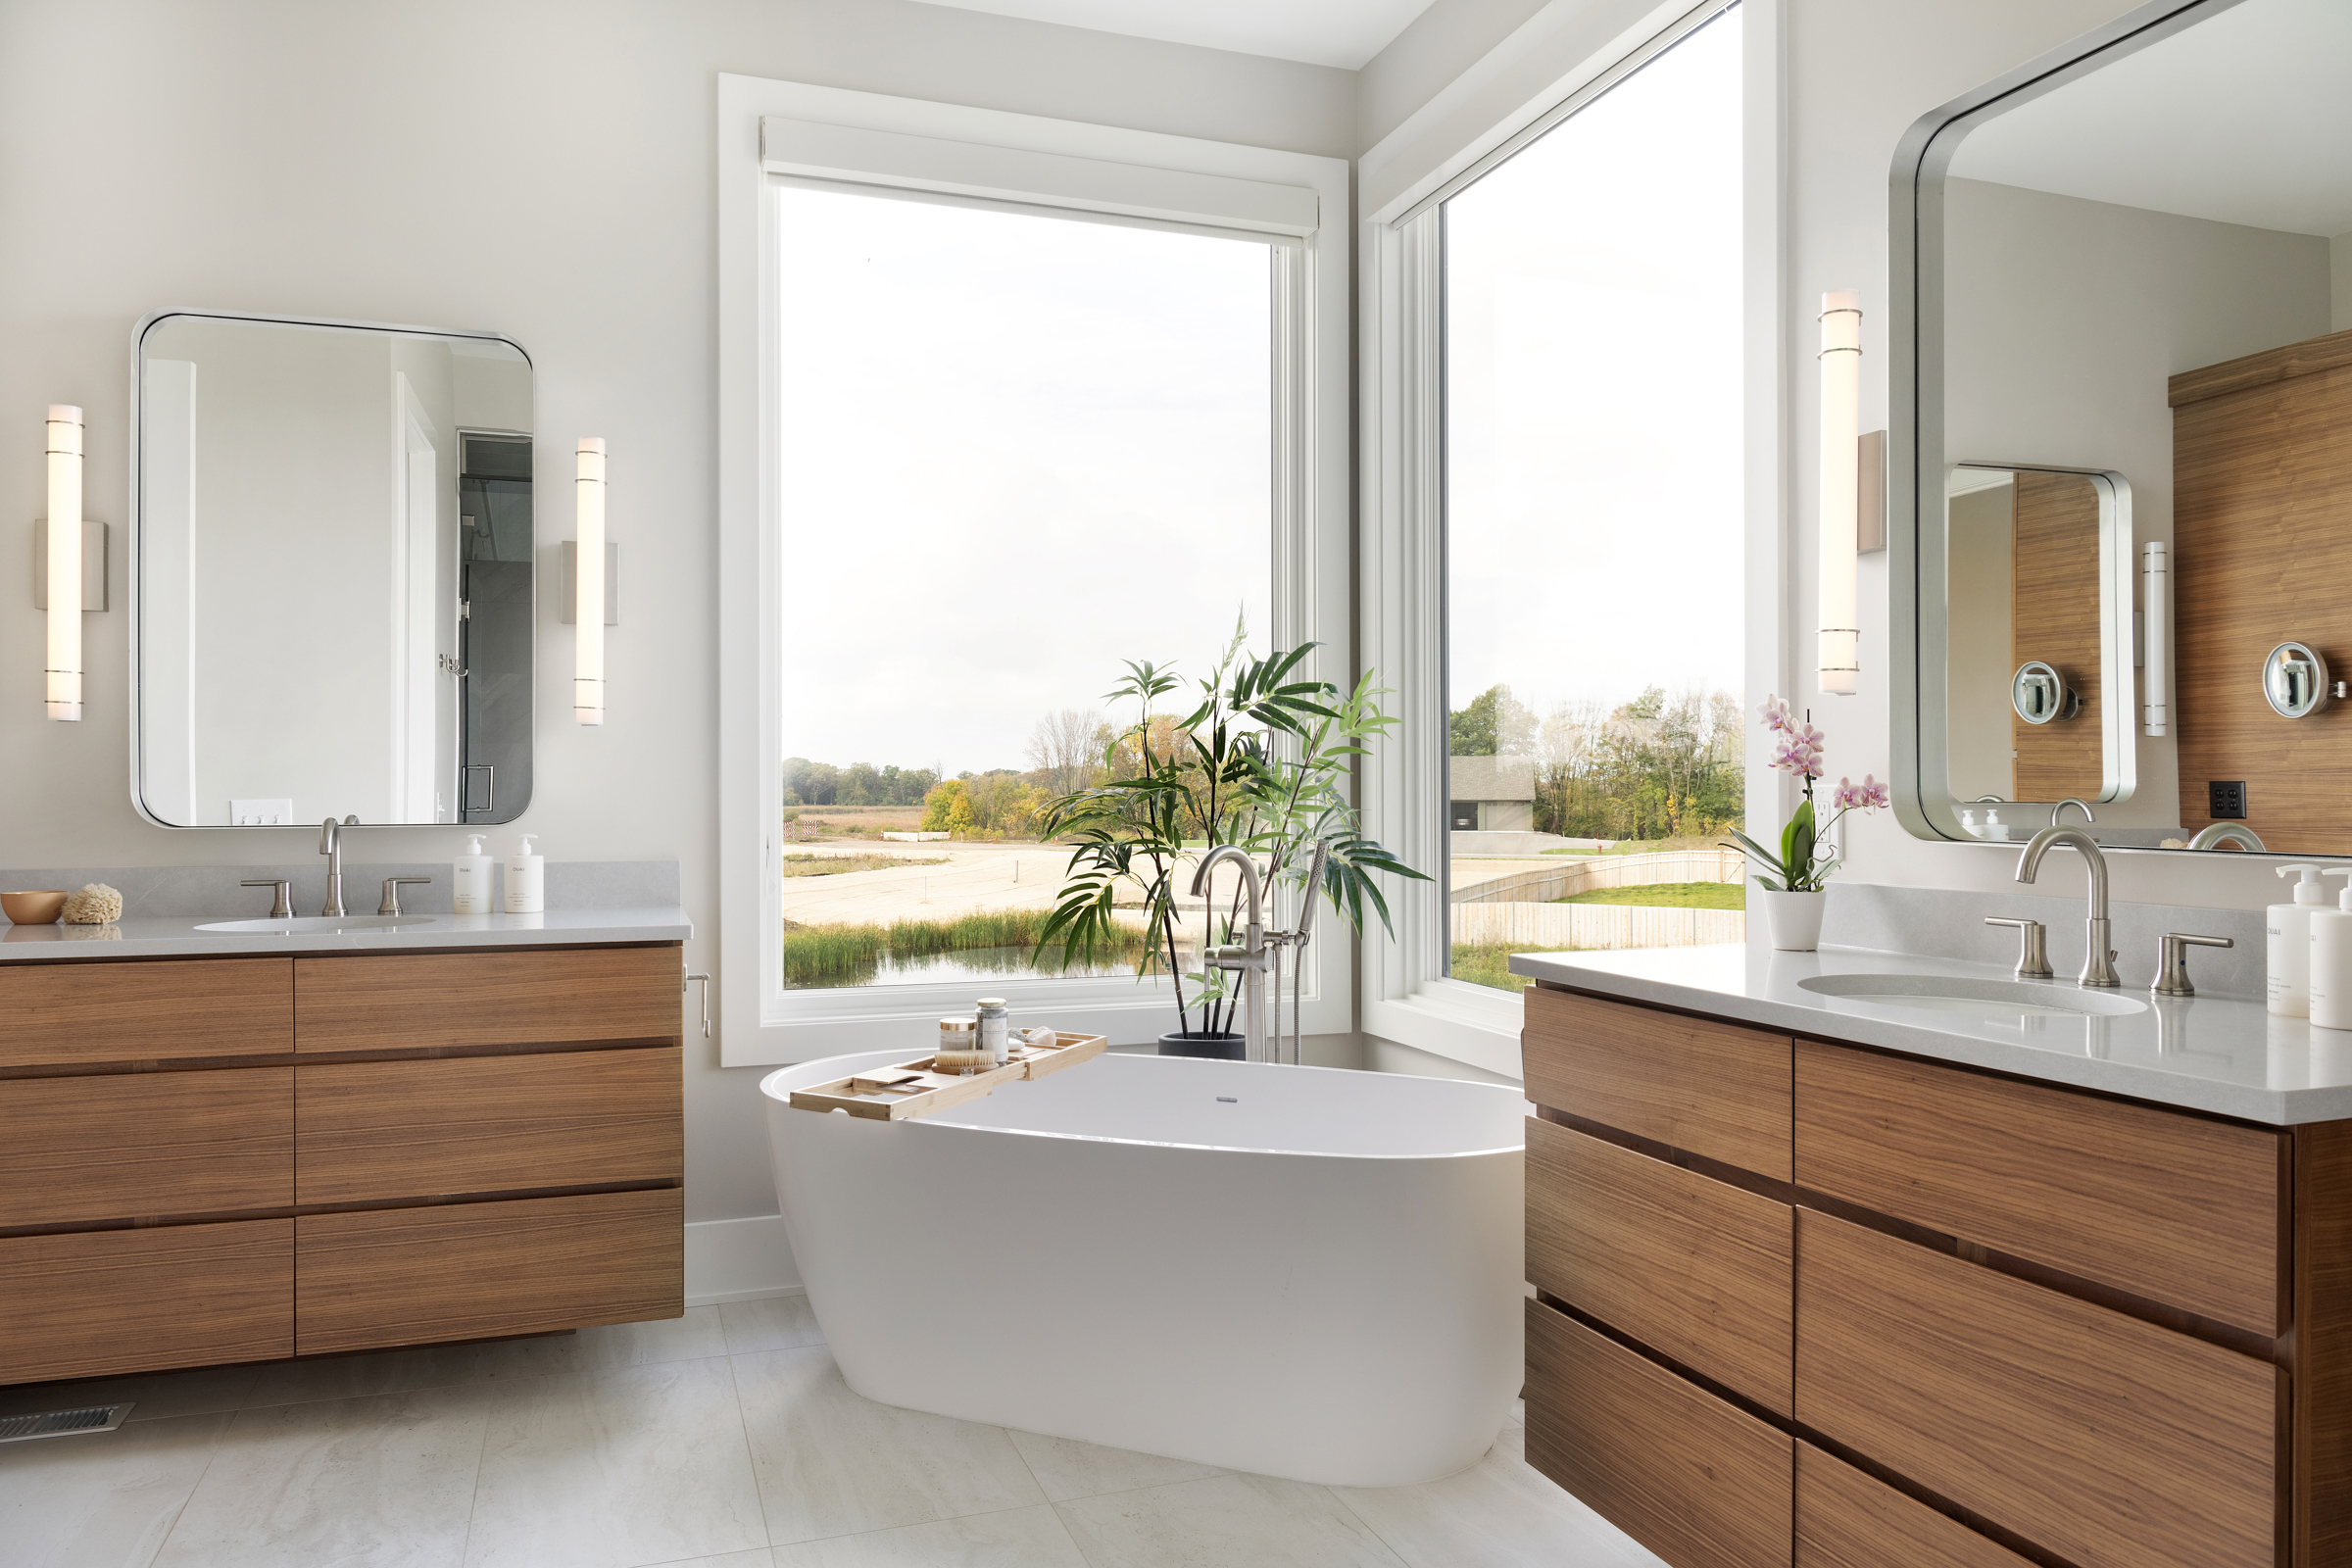 A modern bathroom with wooden cabinets and a large window.